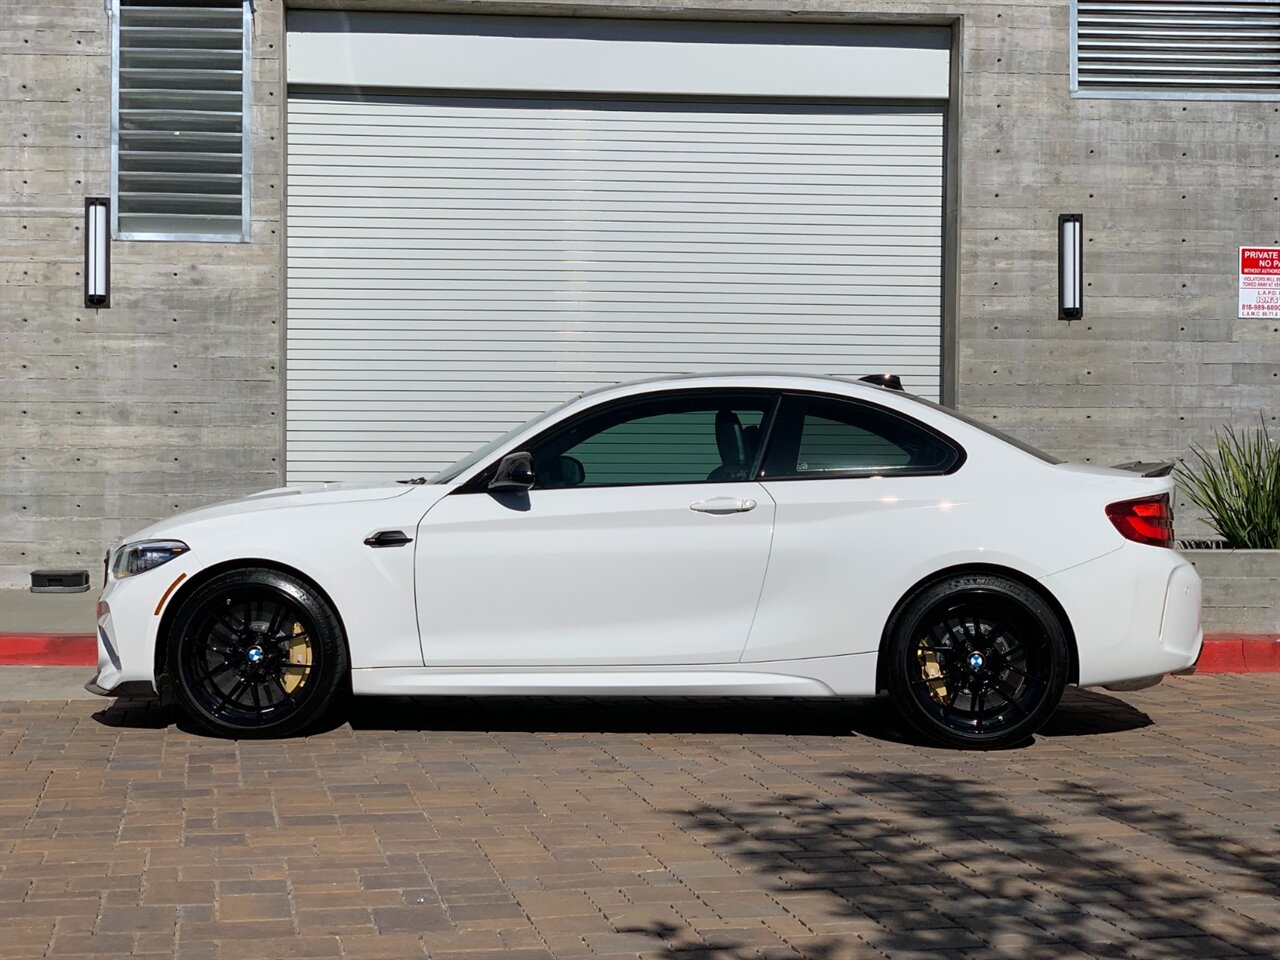 2020 Bmw M2 Cs For Sale In Los Angeles, Ca - 1 Of 5 In The Us Built With  6Mt Alpine White Black Wheels Carbon Ceramic Brakes